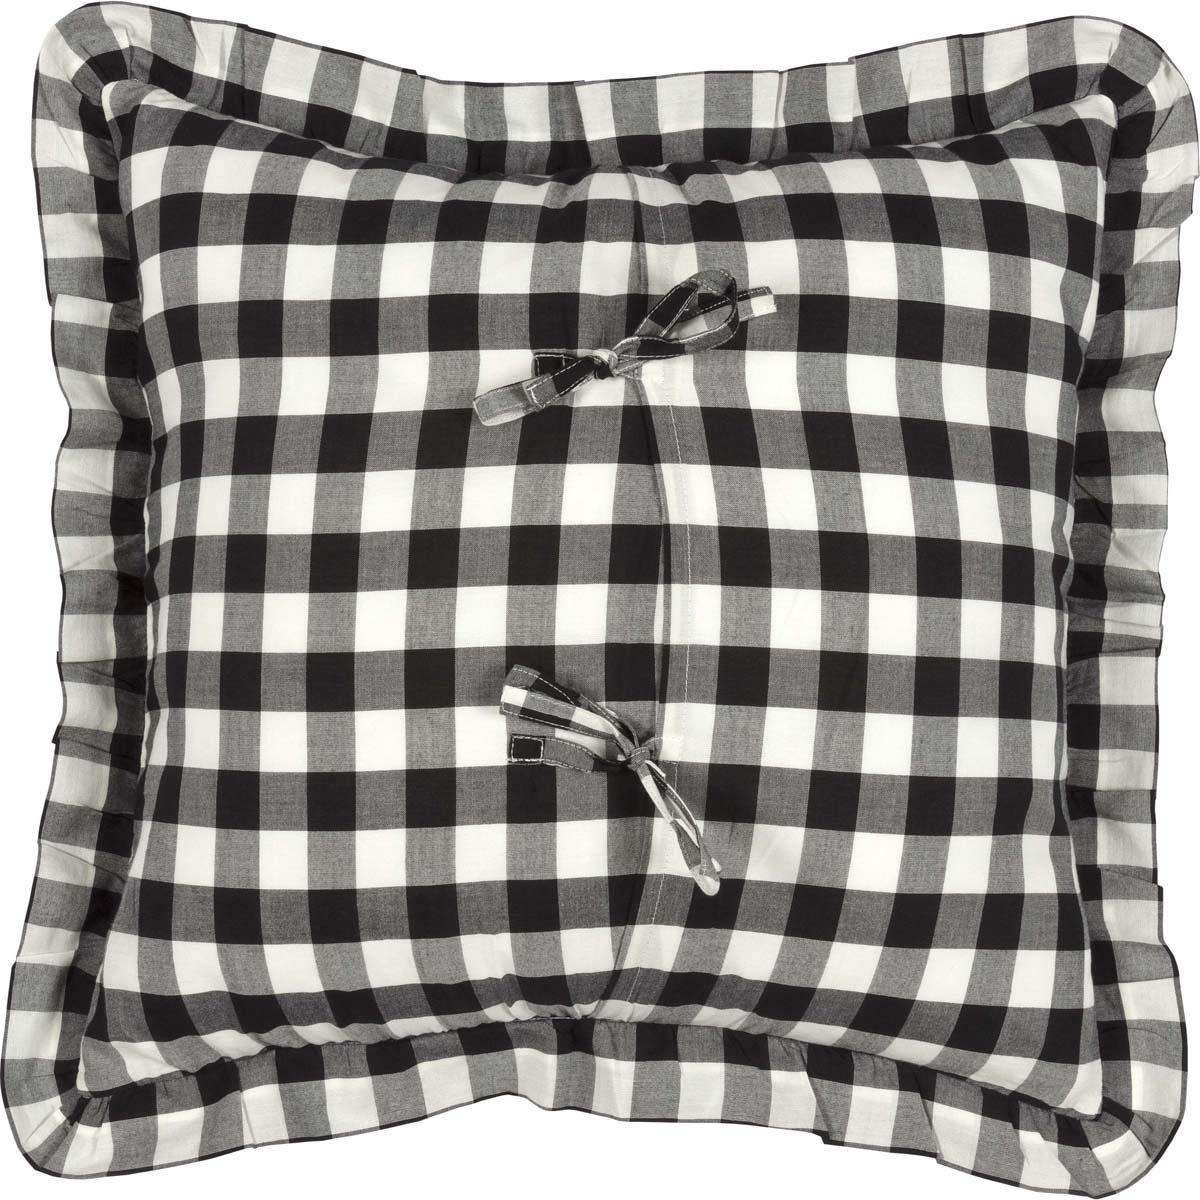 Annie Buffalo Check Ruffled Fabric Pillow Black, Grey, Red Pillows VHC Brands 